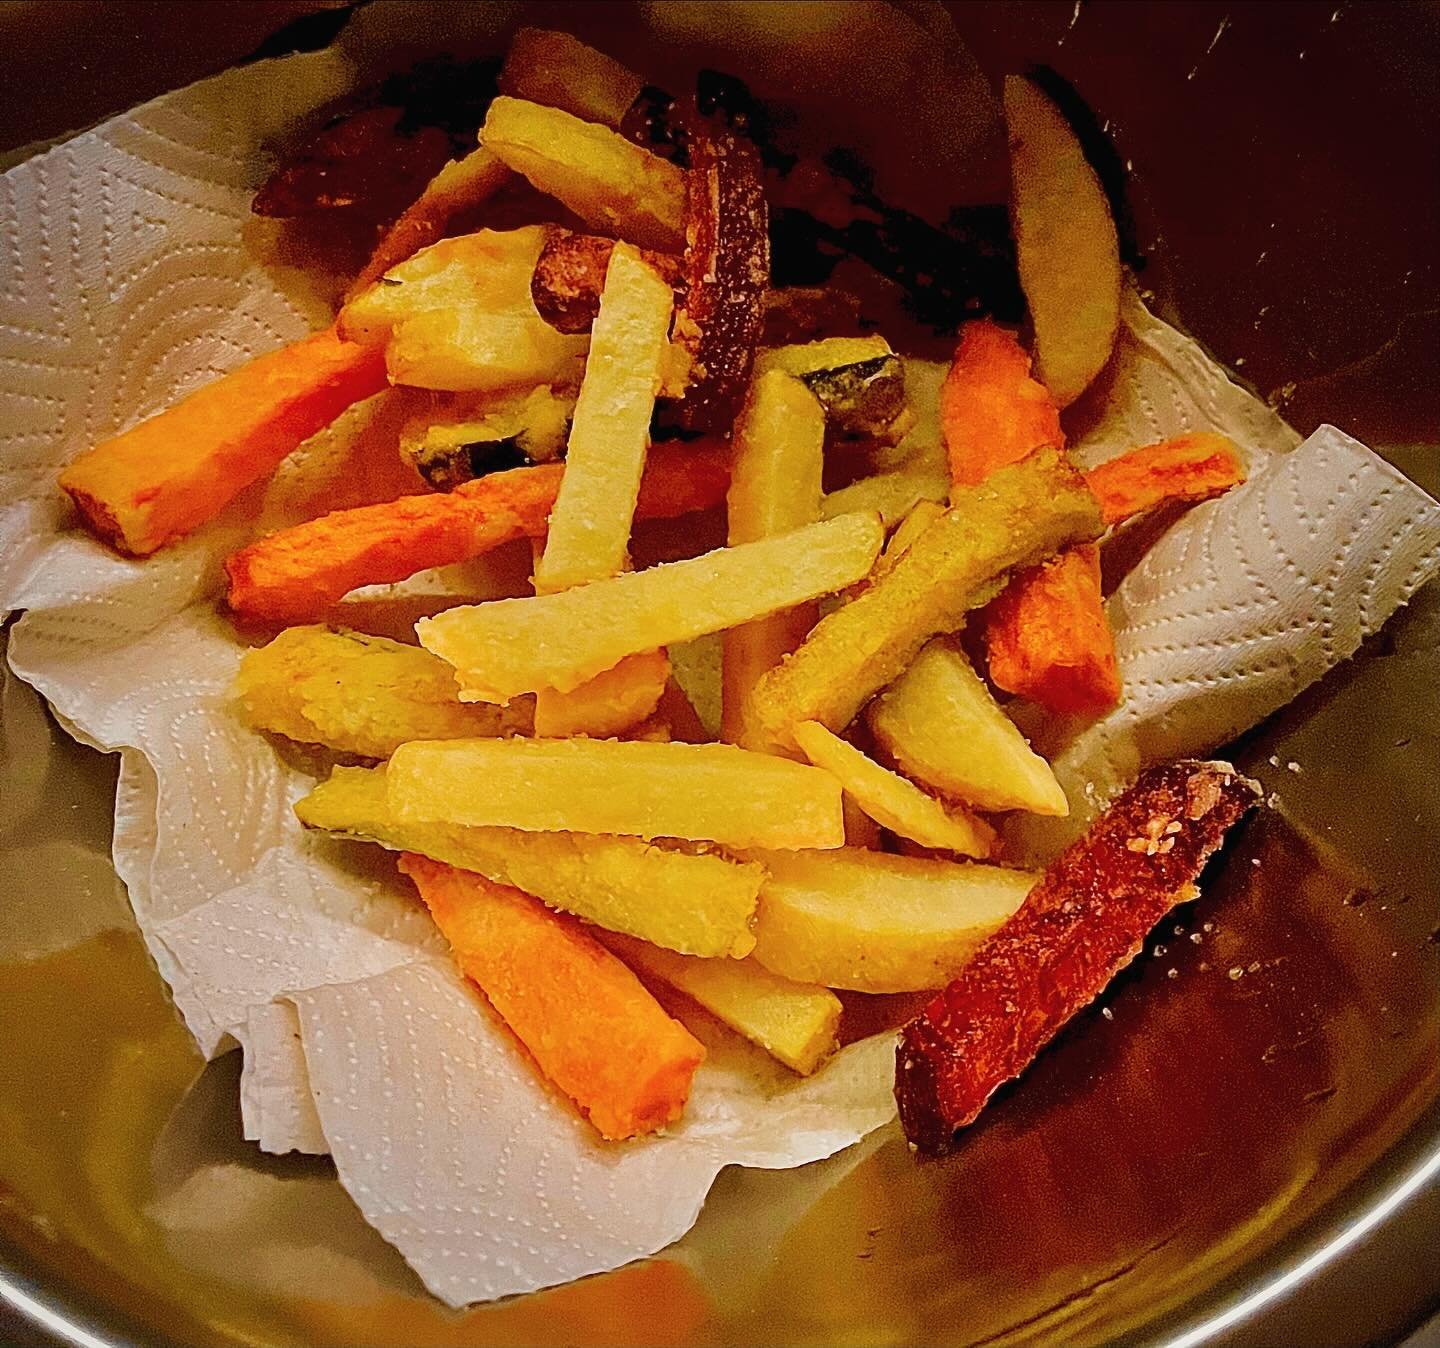 We have finally nailed our rainbow fries - so they will always come to you hot and crispy from now on! 🙌🍟

The fries will also continue be vegan and gluten free too!

Our next project is to perfect our bread - we might even add some colour in &hell